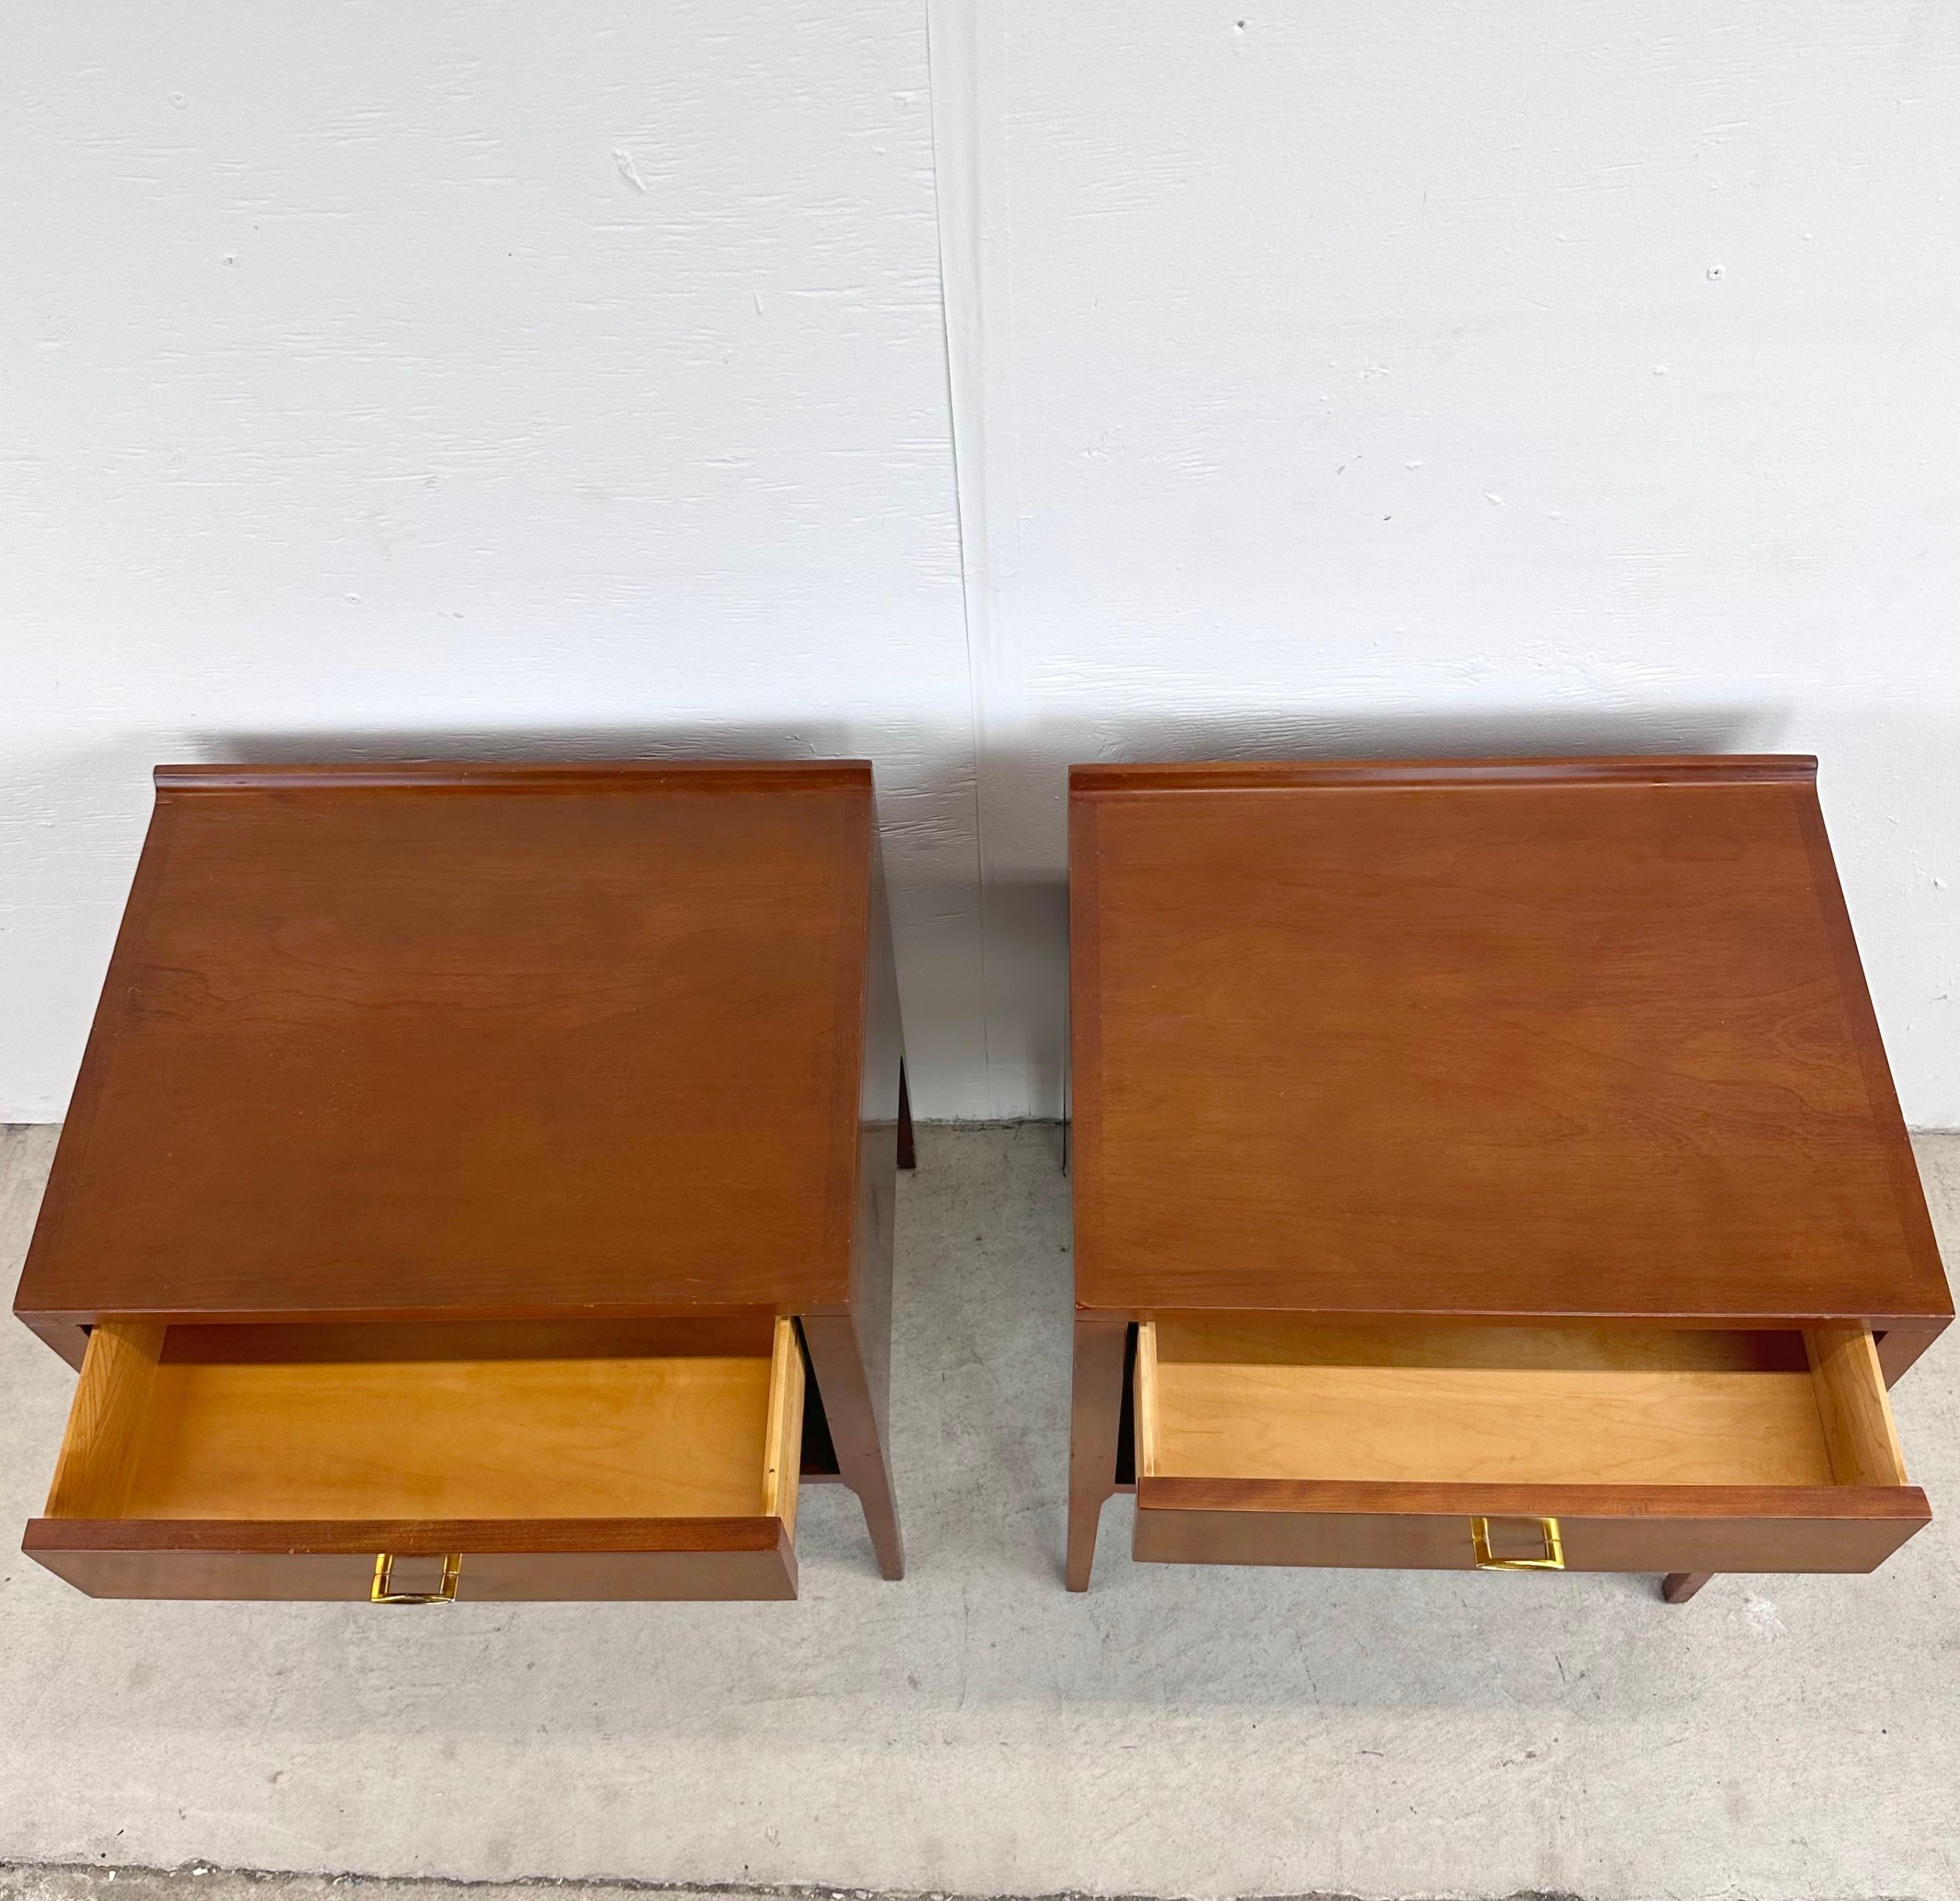 Experience the perfect blend of form and function with this matching mid-century pair of Heywood-Wakefield Contessa Nightstands by Carl Otto. These iconic pieces of mid-century design bring a touch of timeless elegance to your bedside, transforming